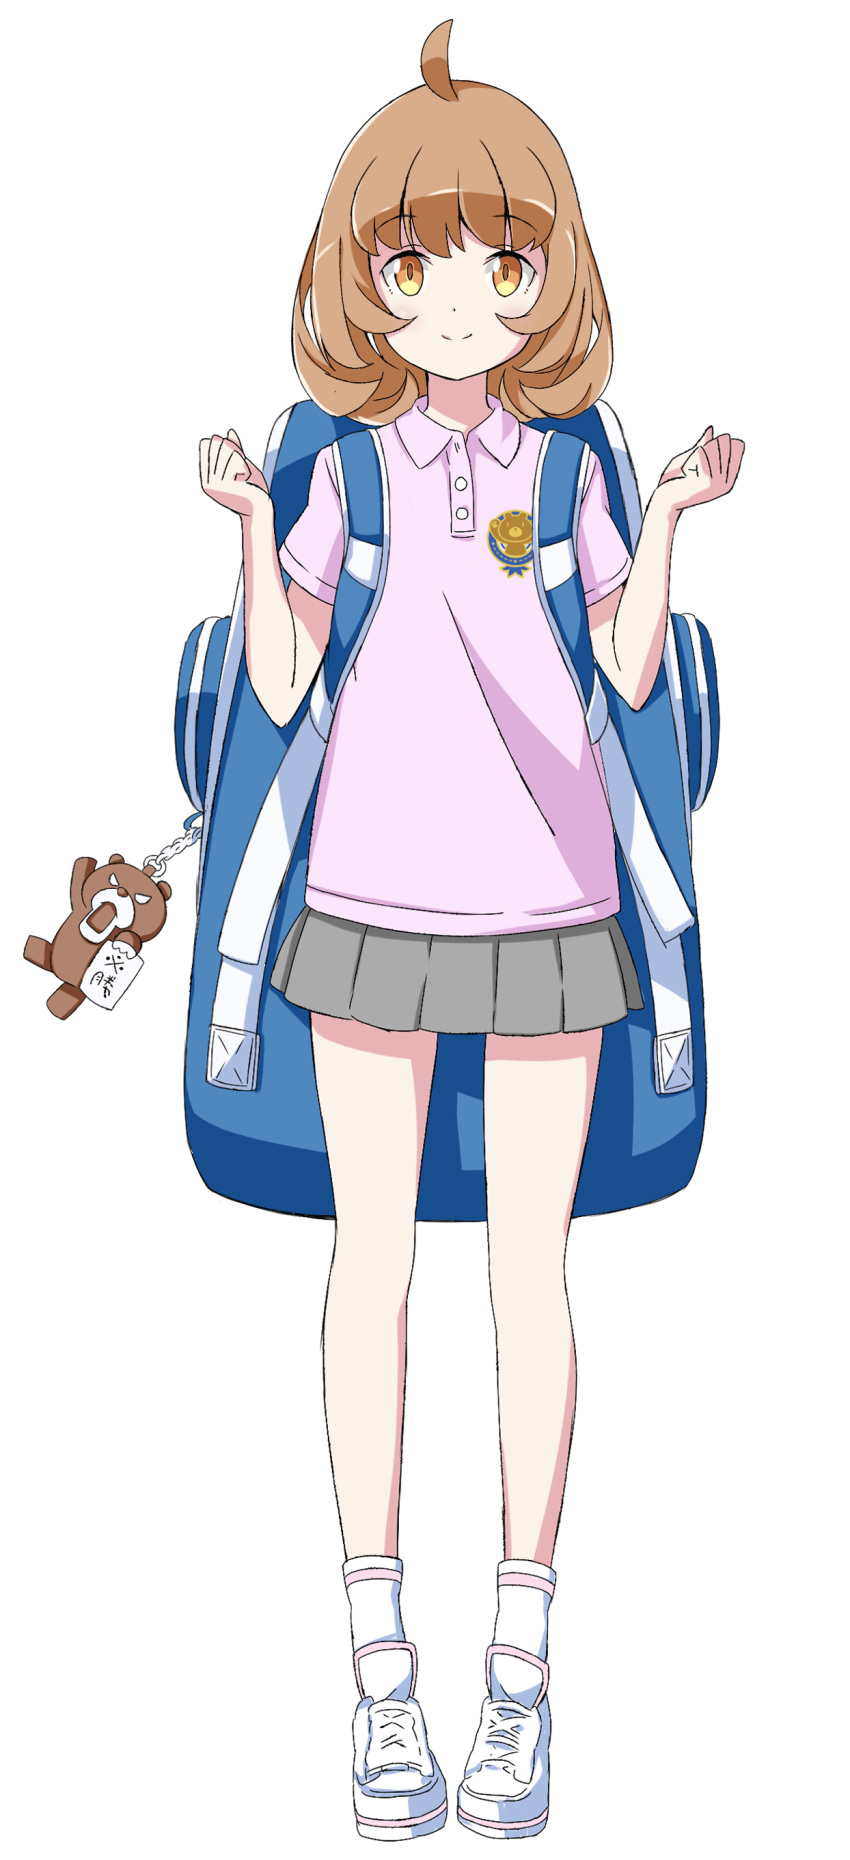 1girl absurdres backpack bag brown_eyes brown_hair clenched_hands full_body grey_skirt henkei_shoujo highres keychain logo looking_at_viewer official_art pink_shirt pink_shorts pleated_skirt polo_shirt raised_hands rin_(henkei_shoujo) shirt shoes short_sleeves shorts skirt smile socks solo stuffed_animal stuffed_toy teddy_bear transparent_background white_legwear white_shoes